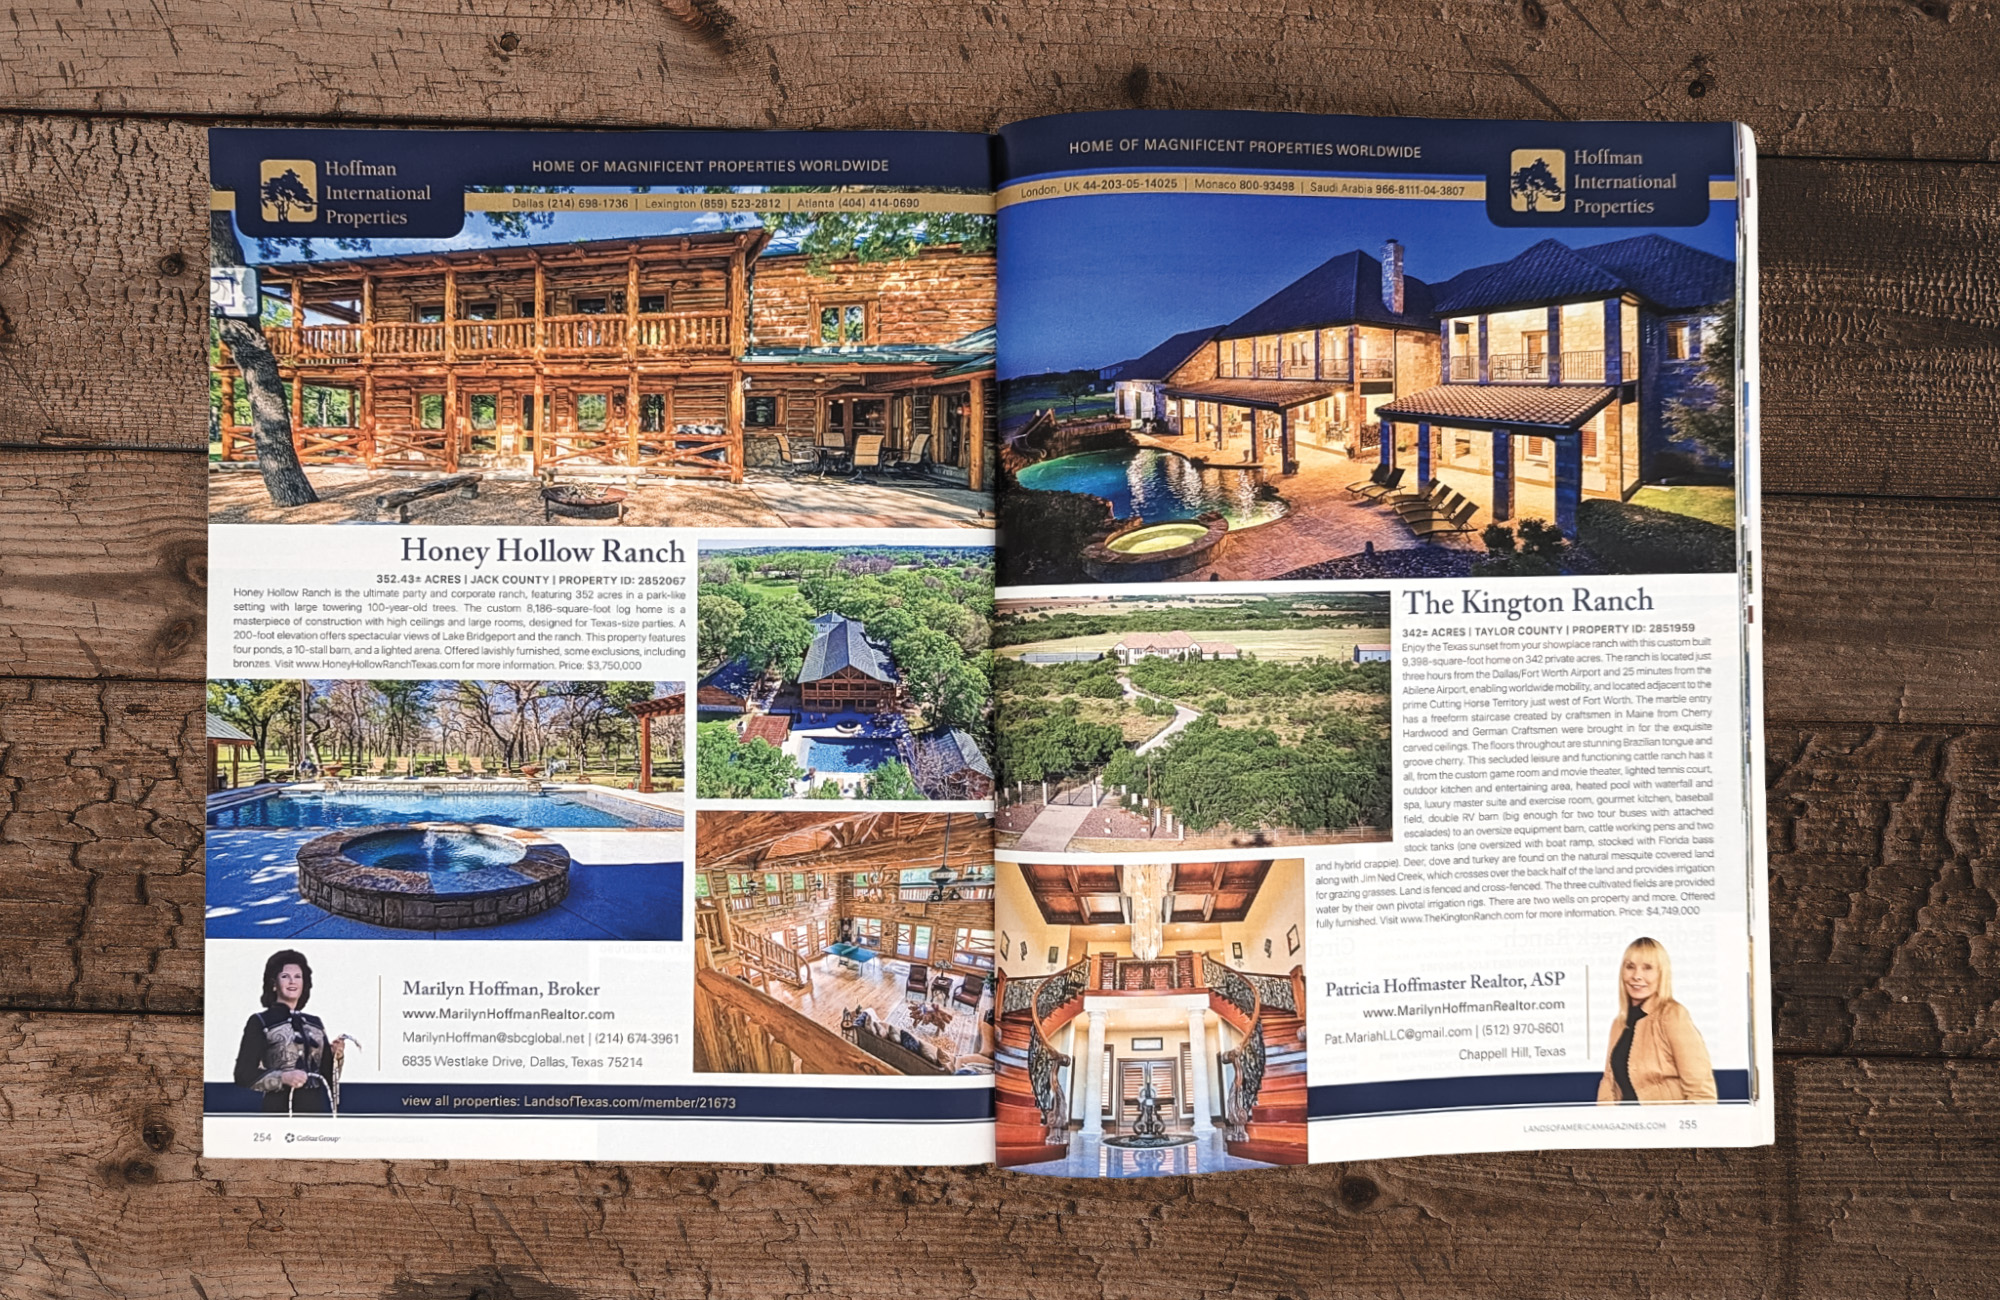 A magazine on a wooden surface open to a spread for property listings for Hoffman International Properties. The left page is for a multimillion dollar log cabin style mansion while the right page is for a multimillion dollar stone exterior mansion.